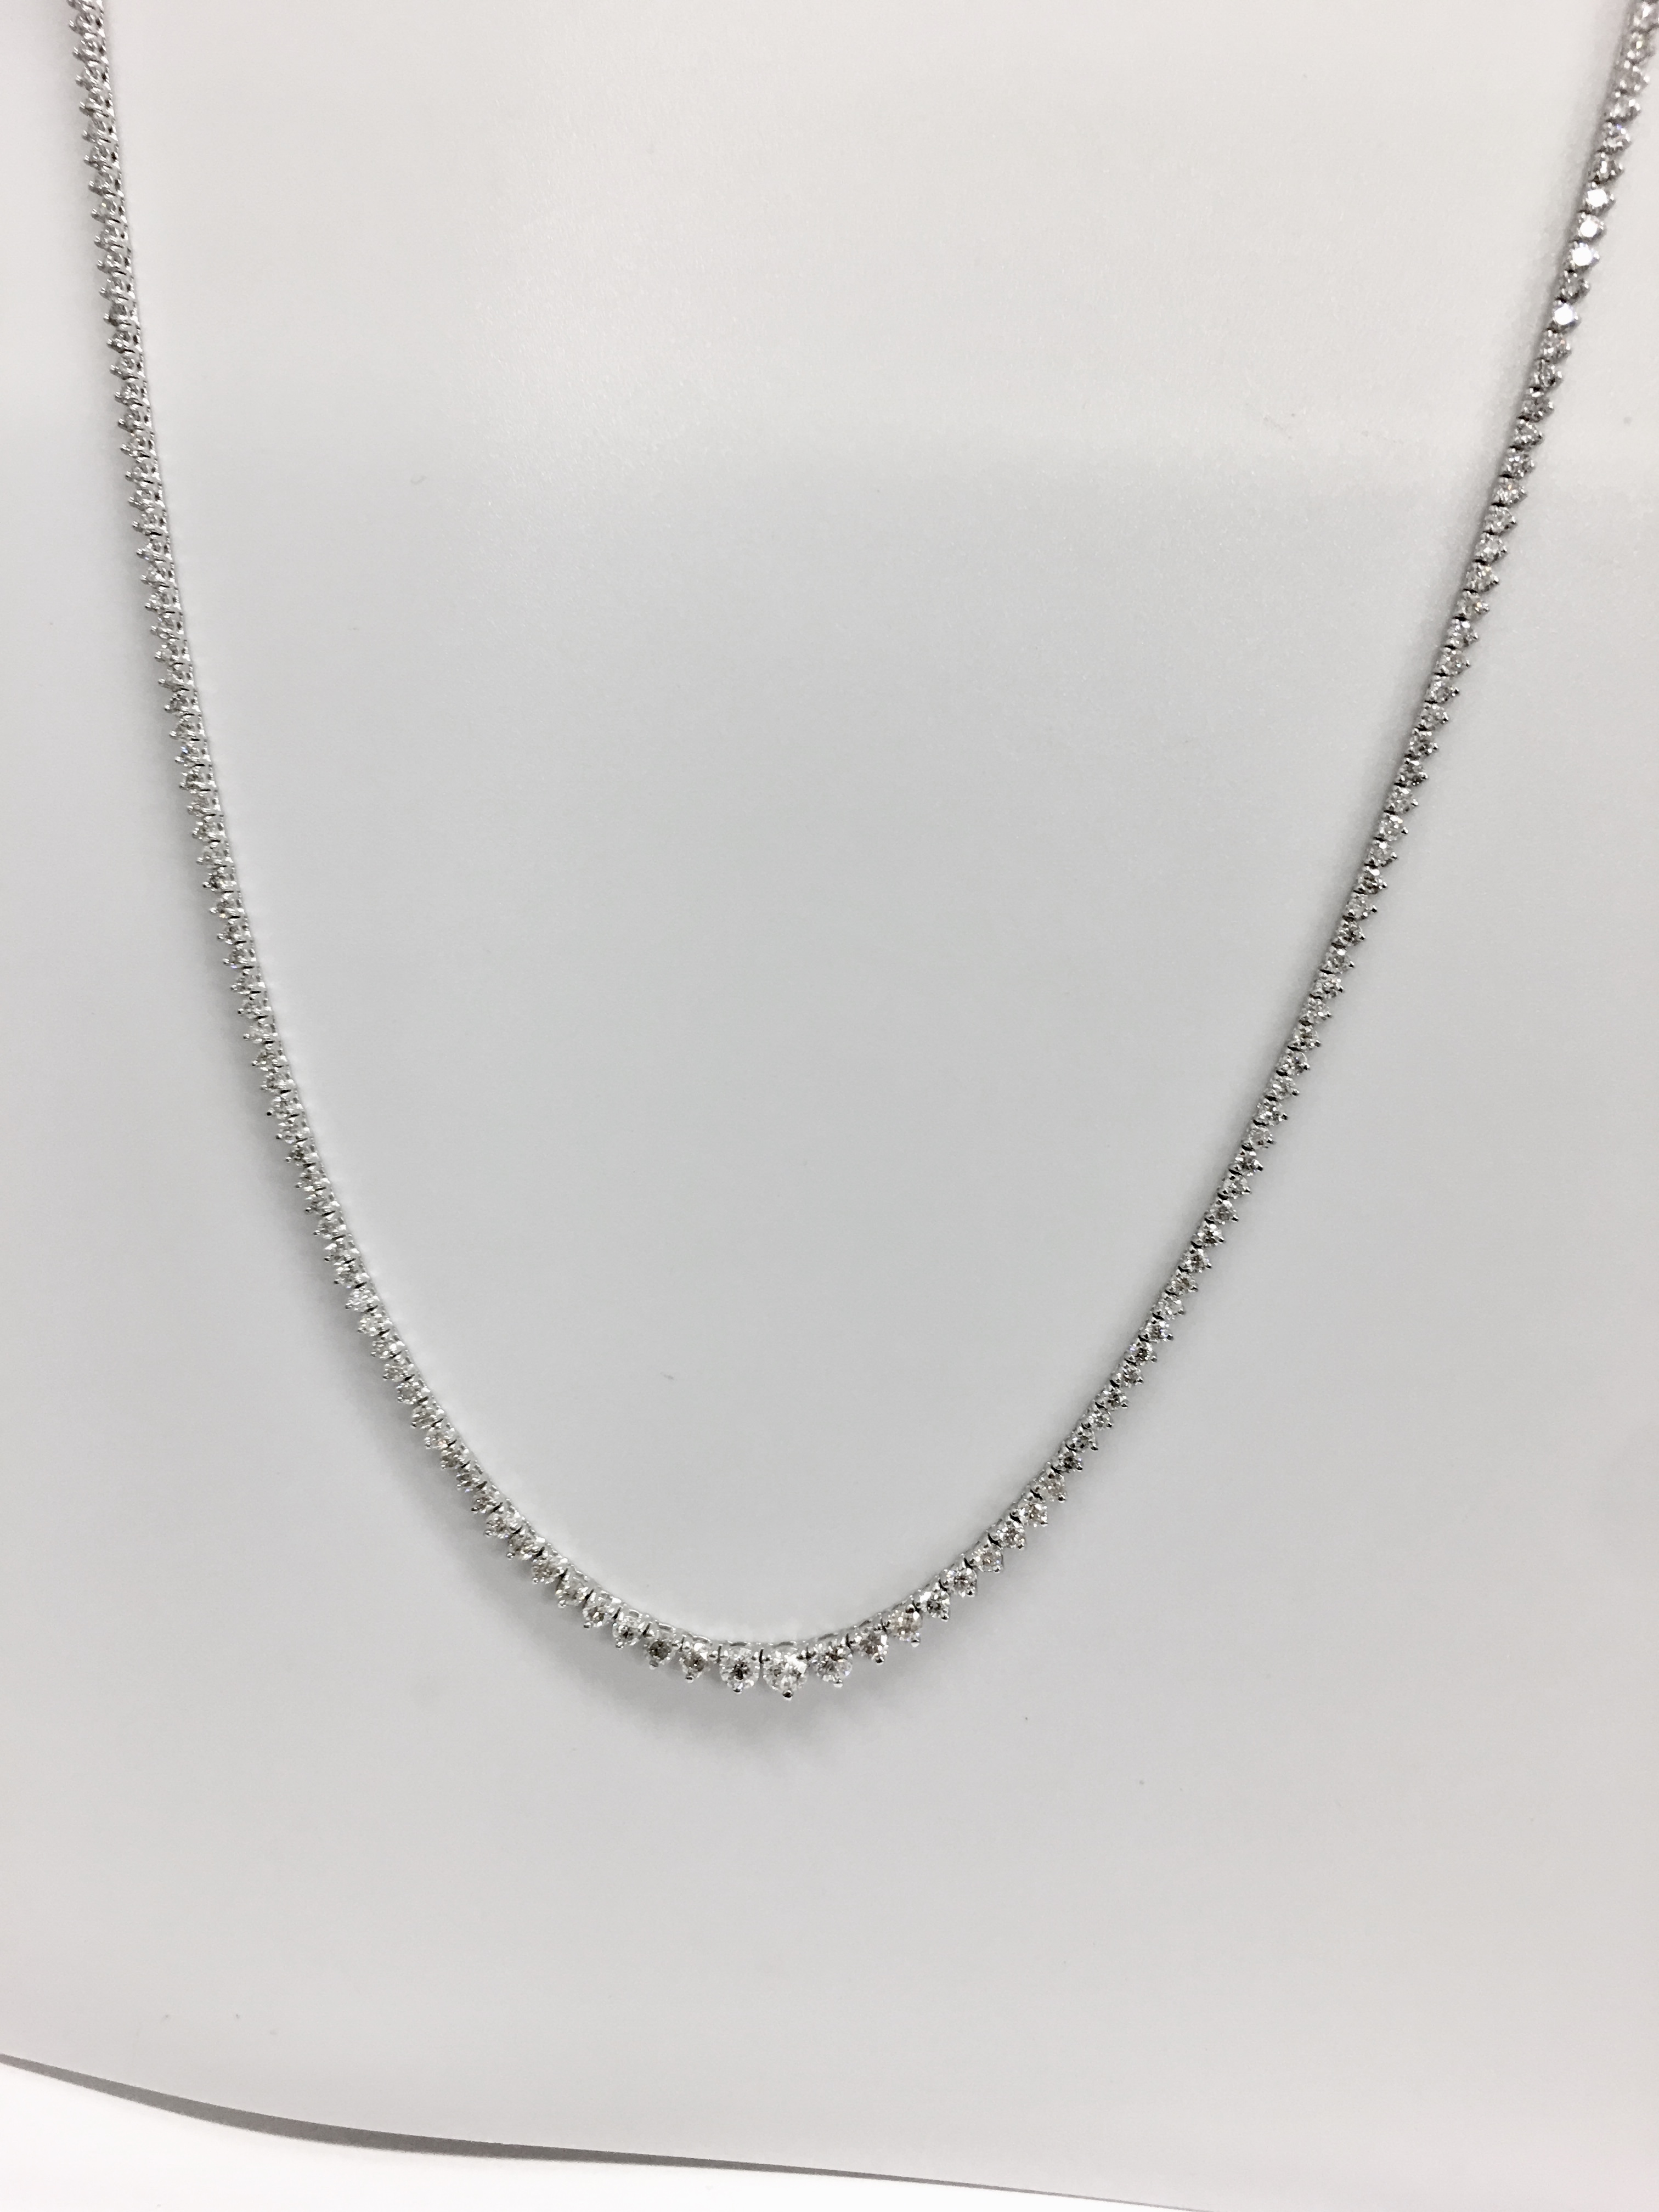 11.75ct Diamond tennis style necklace. 3 claw setting. Graduated diamonds, I colour, Si2 clarity - Image 5 of 6